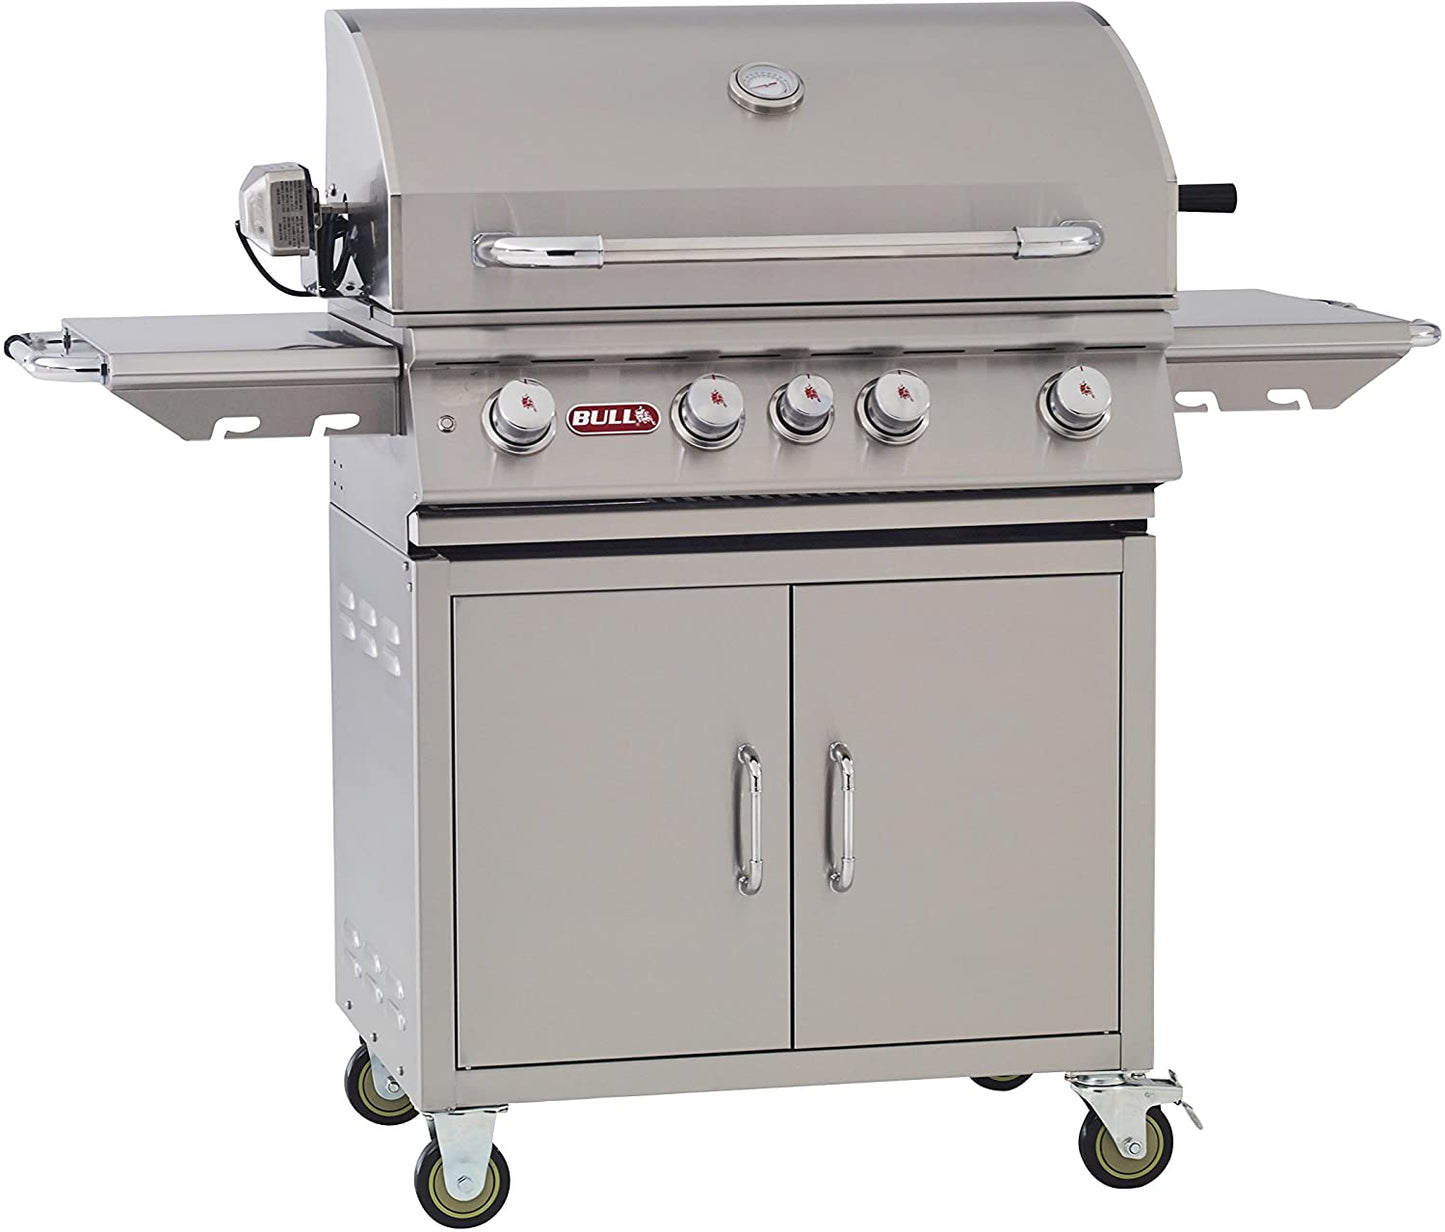 Bull BBQ Angus 30-Inch 4-Burner Freestanding Grill with Rear Infrared Burner